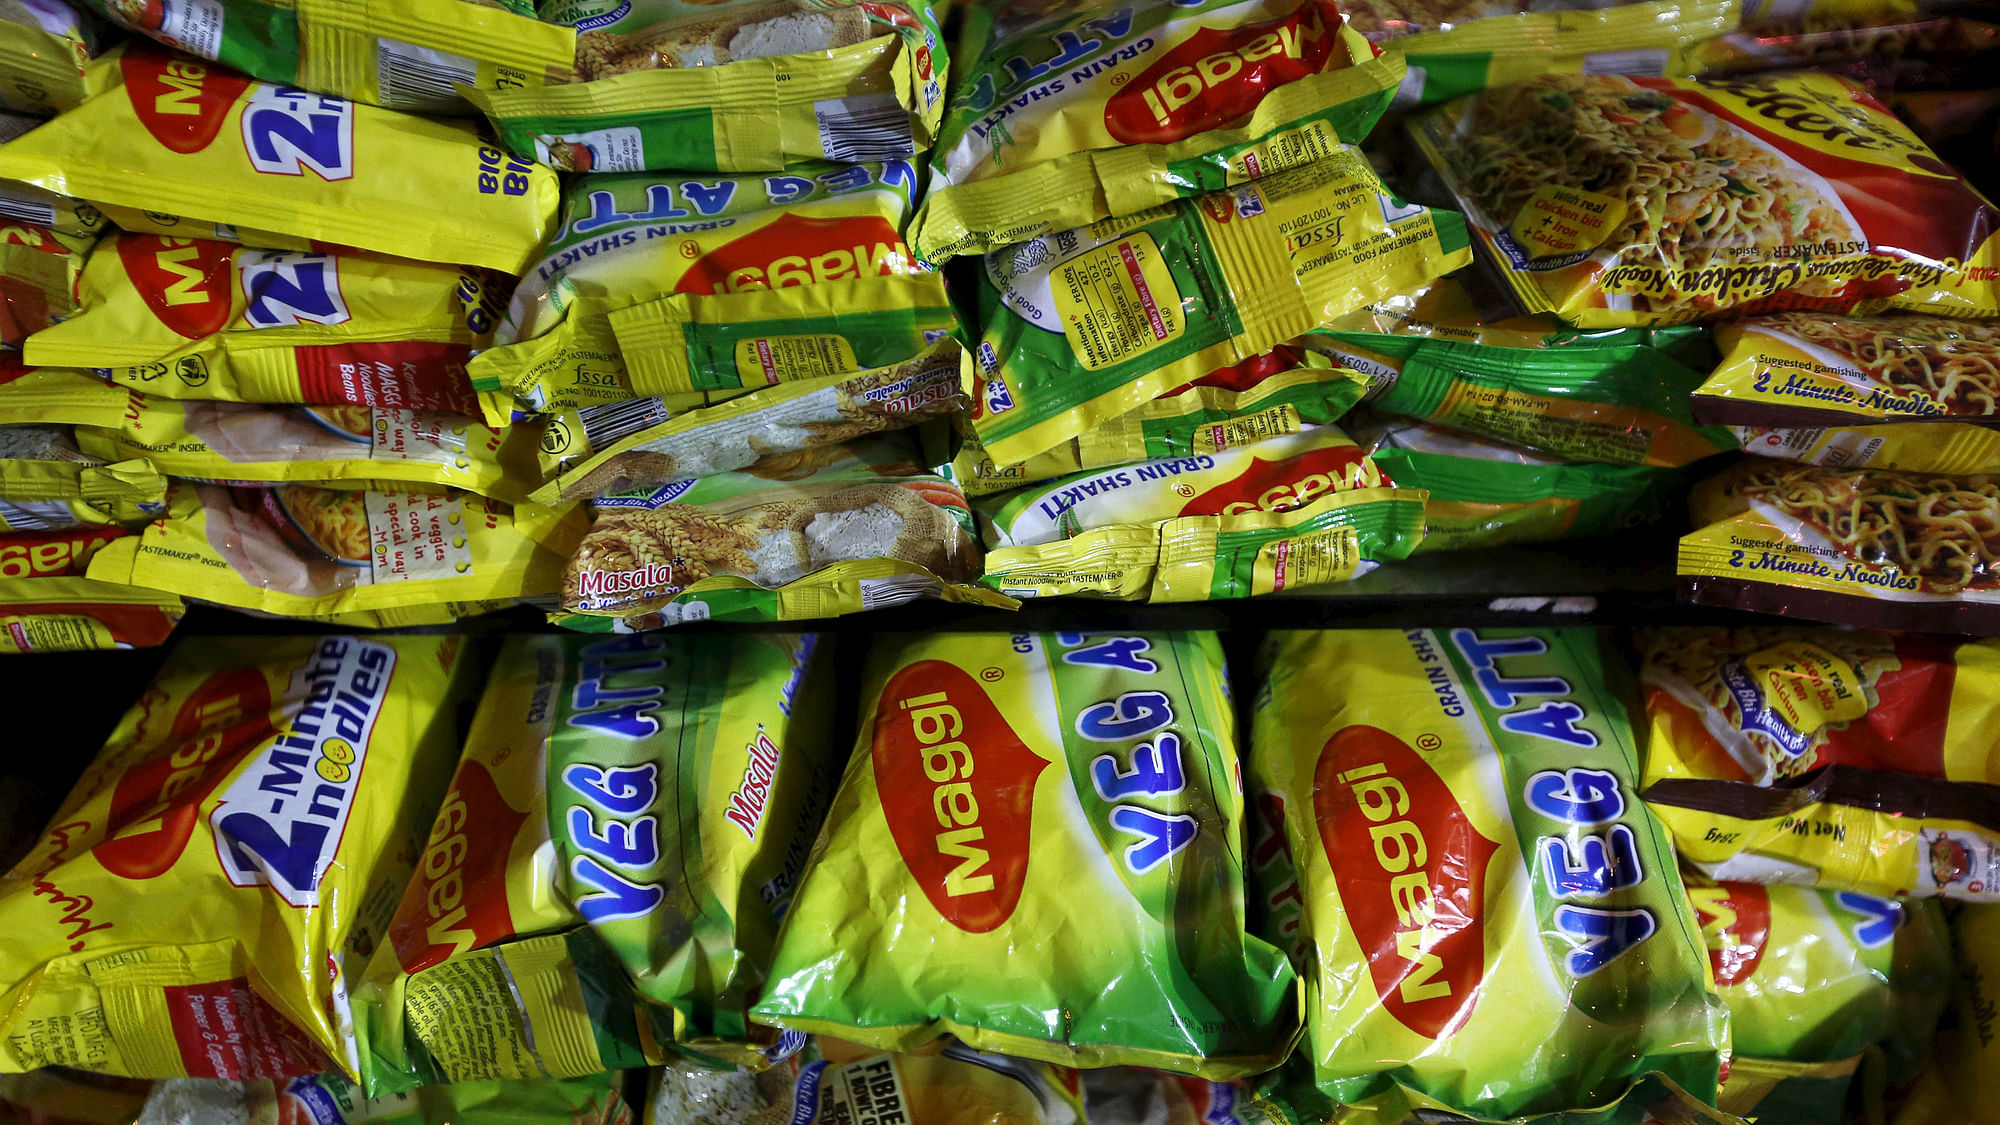 Packets of Nestle’s Maggi instant noodles seen on display at a grocery store in Mumbai, India. (Photo: Reuters) 